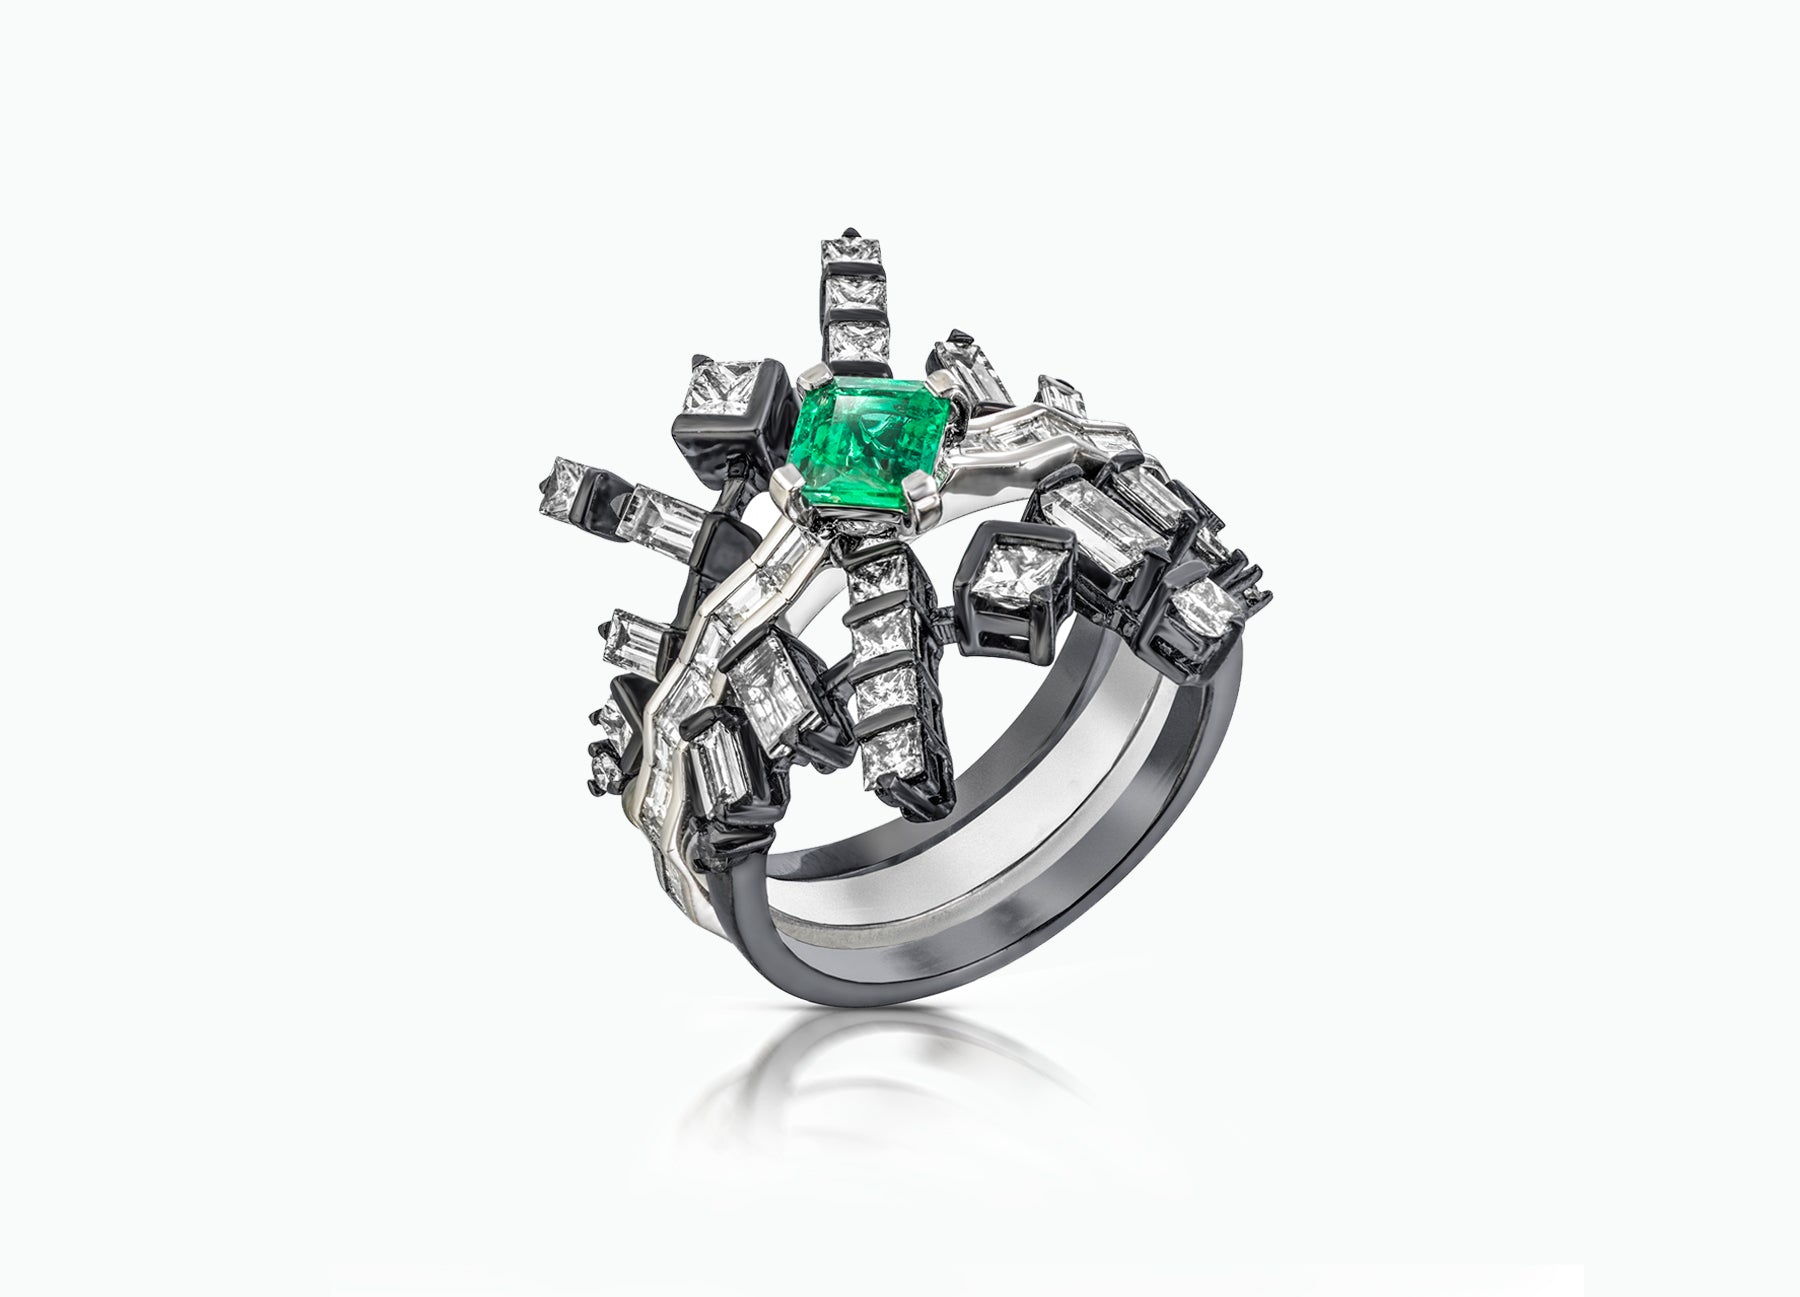 Cosmic Art Ring alternative bridal set by Tomasz Donocik a set of three rings with diamonds and an emerald centre stone three quarter view